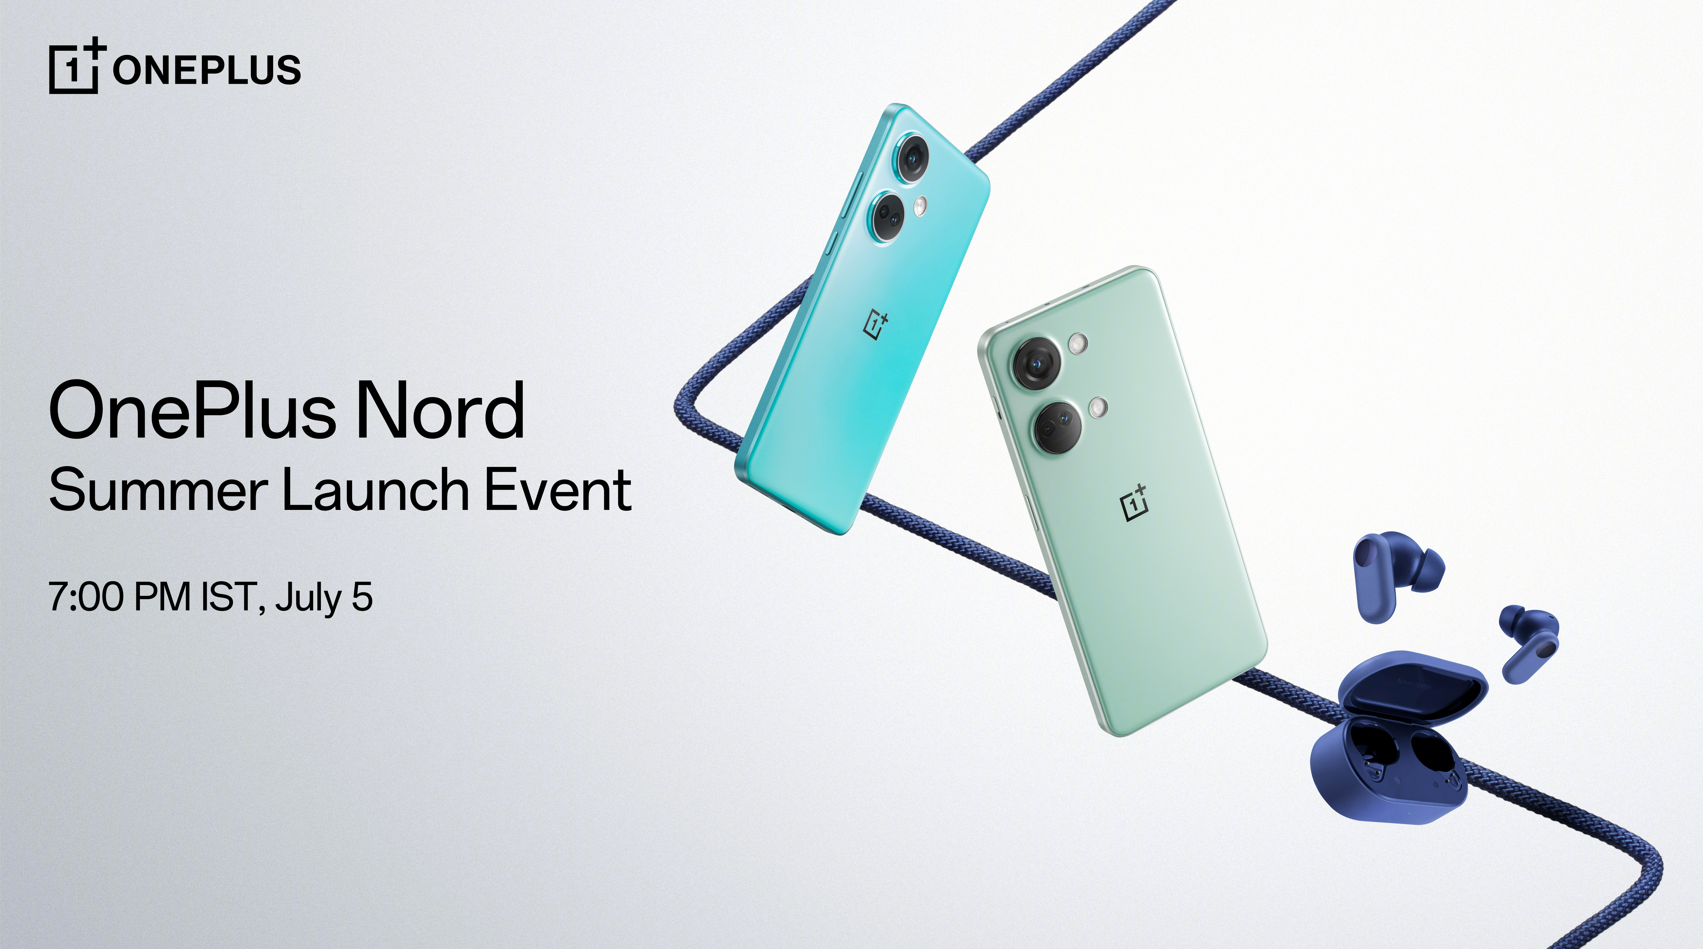 Designed for dynamic lifestyles, OnePlus reveals first look of OnePlus Nord 3 5G